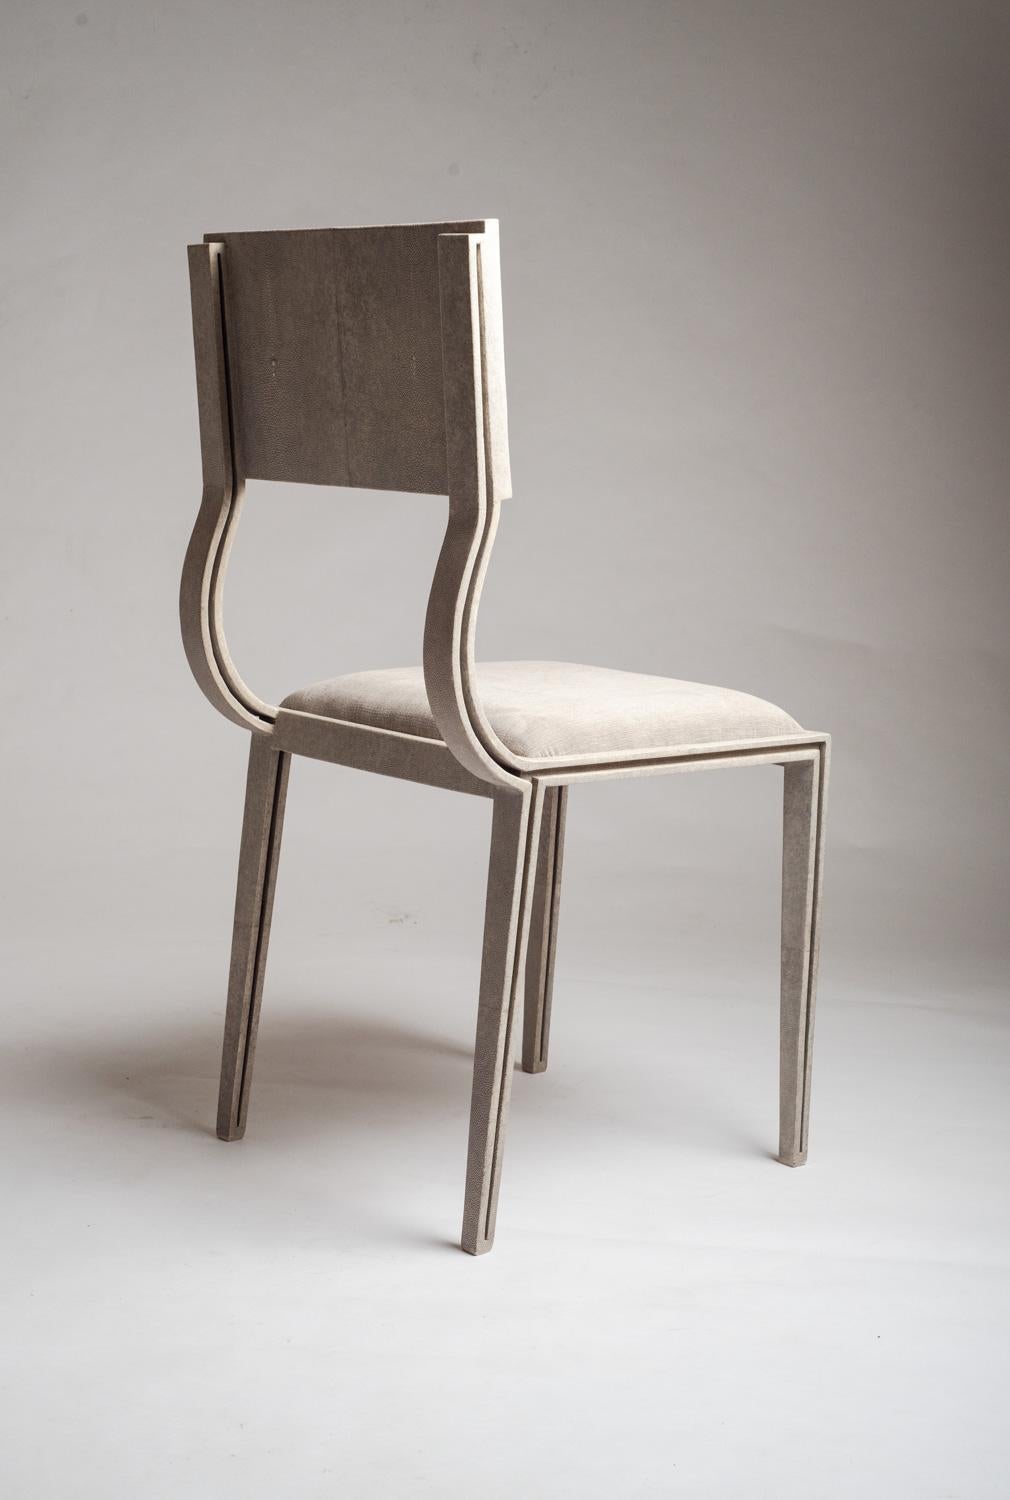 The Lola chair mixes elegance and comfort. Perfect for your dining room. The antique natural shagreen legs are unique and subtle with it's indentation details that complement the overall piece. The seat is upholstered in a luxurious soft cream linen